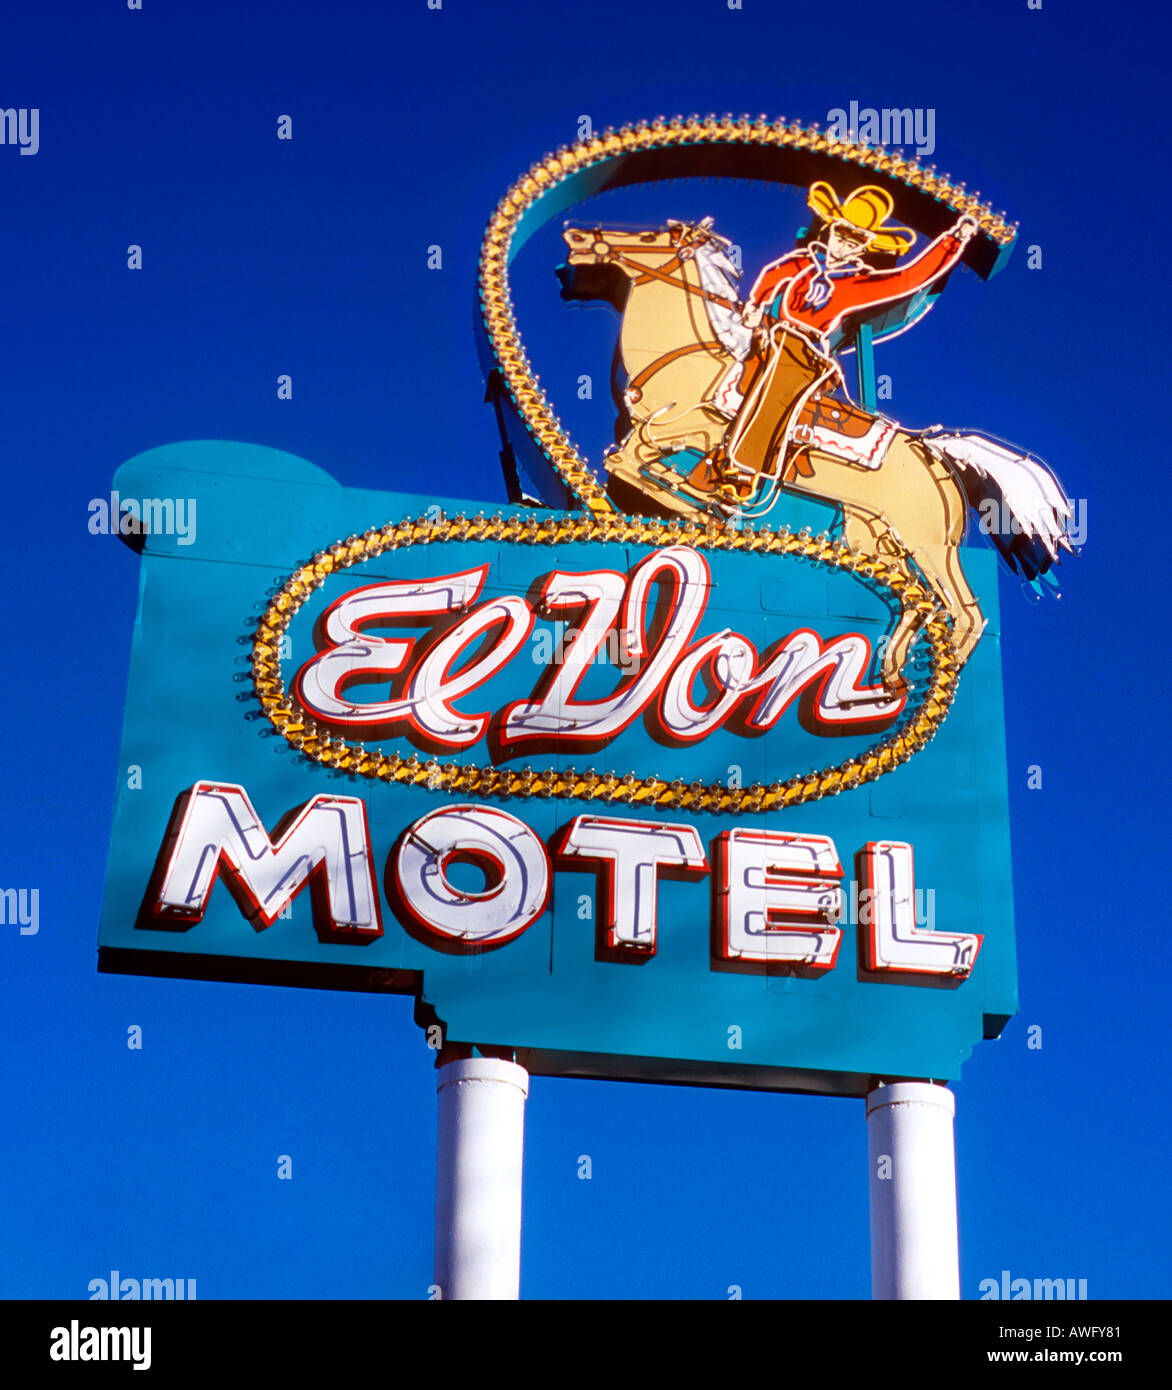 Details about   Original PHOTOGRAPH of the EL DON Motel Sign Urban Photography